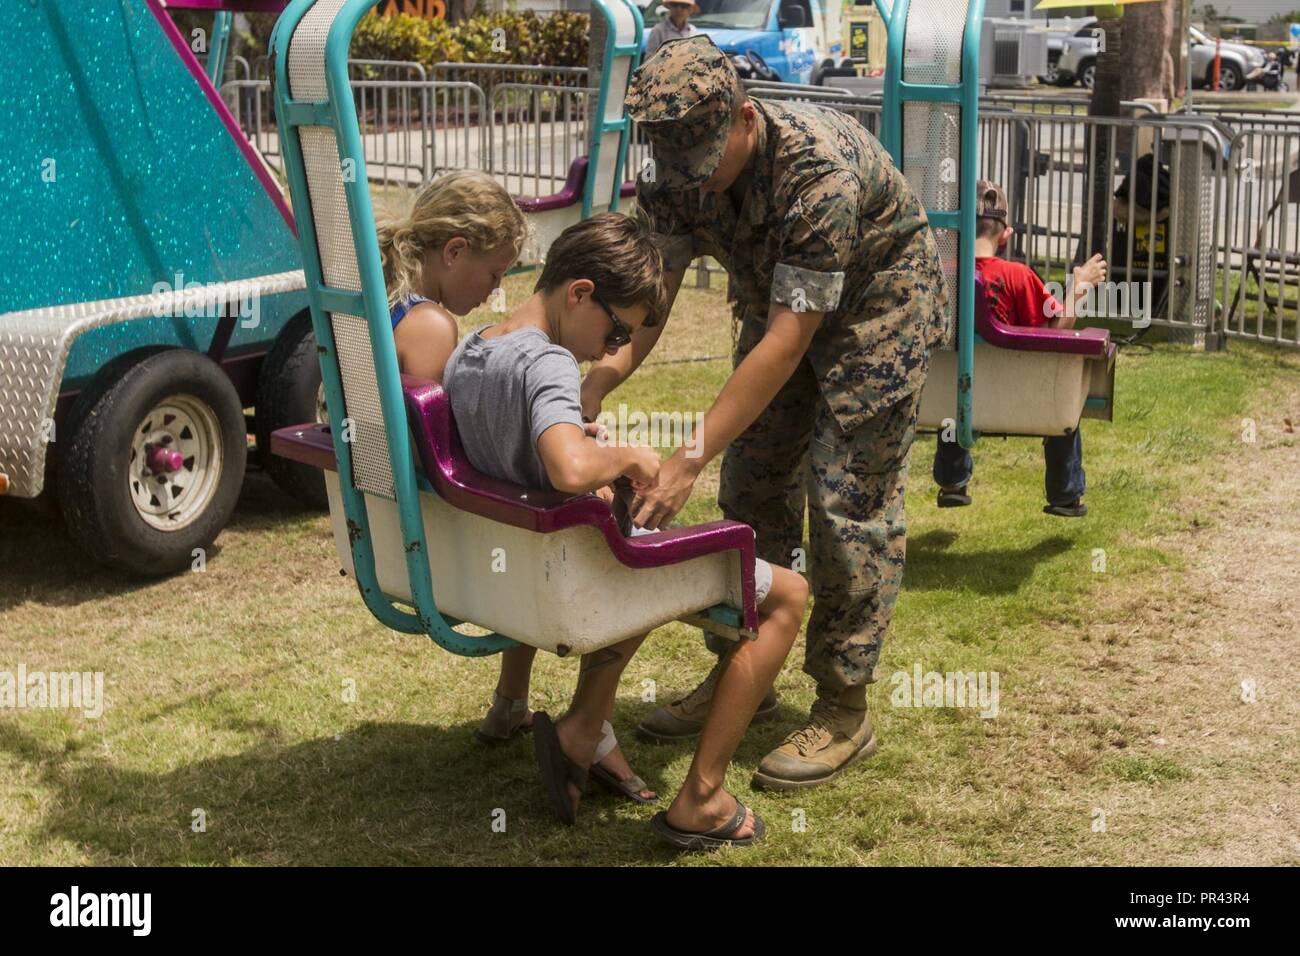 Lance Cpl. Christopher Reyes, a finance technician with Headquarters Battalion, helps children with their seatbelts on a fair ride during the Klipper Summer Bash at the Klipper Golf Course aboard Marine Corps Base Hawaii, July 28, 2017. The Summer Bash is an annual event hosted by the Klipper Golf Course to strengthen a sense of community amongst residents of MCB Hawaii. Stock Photo